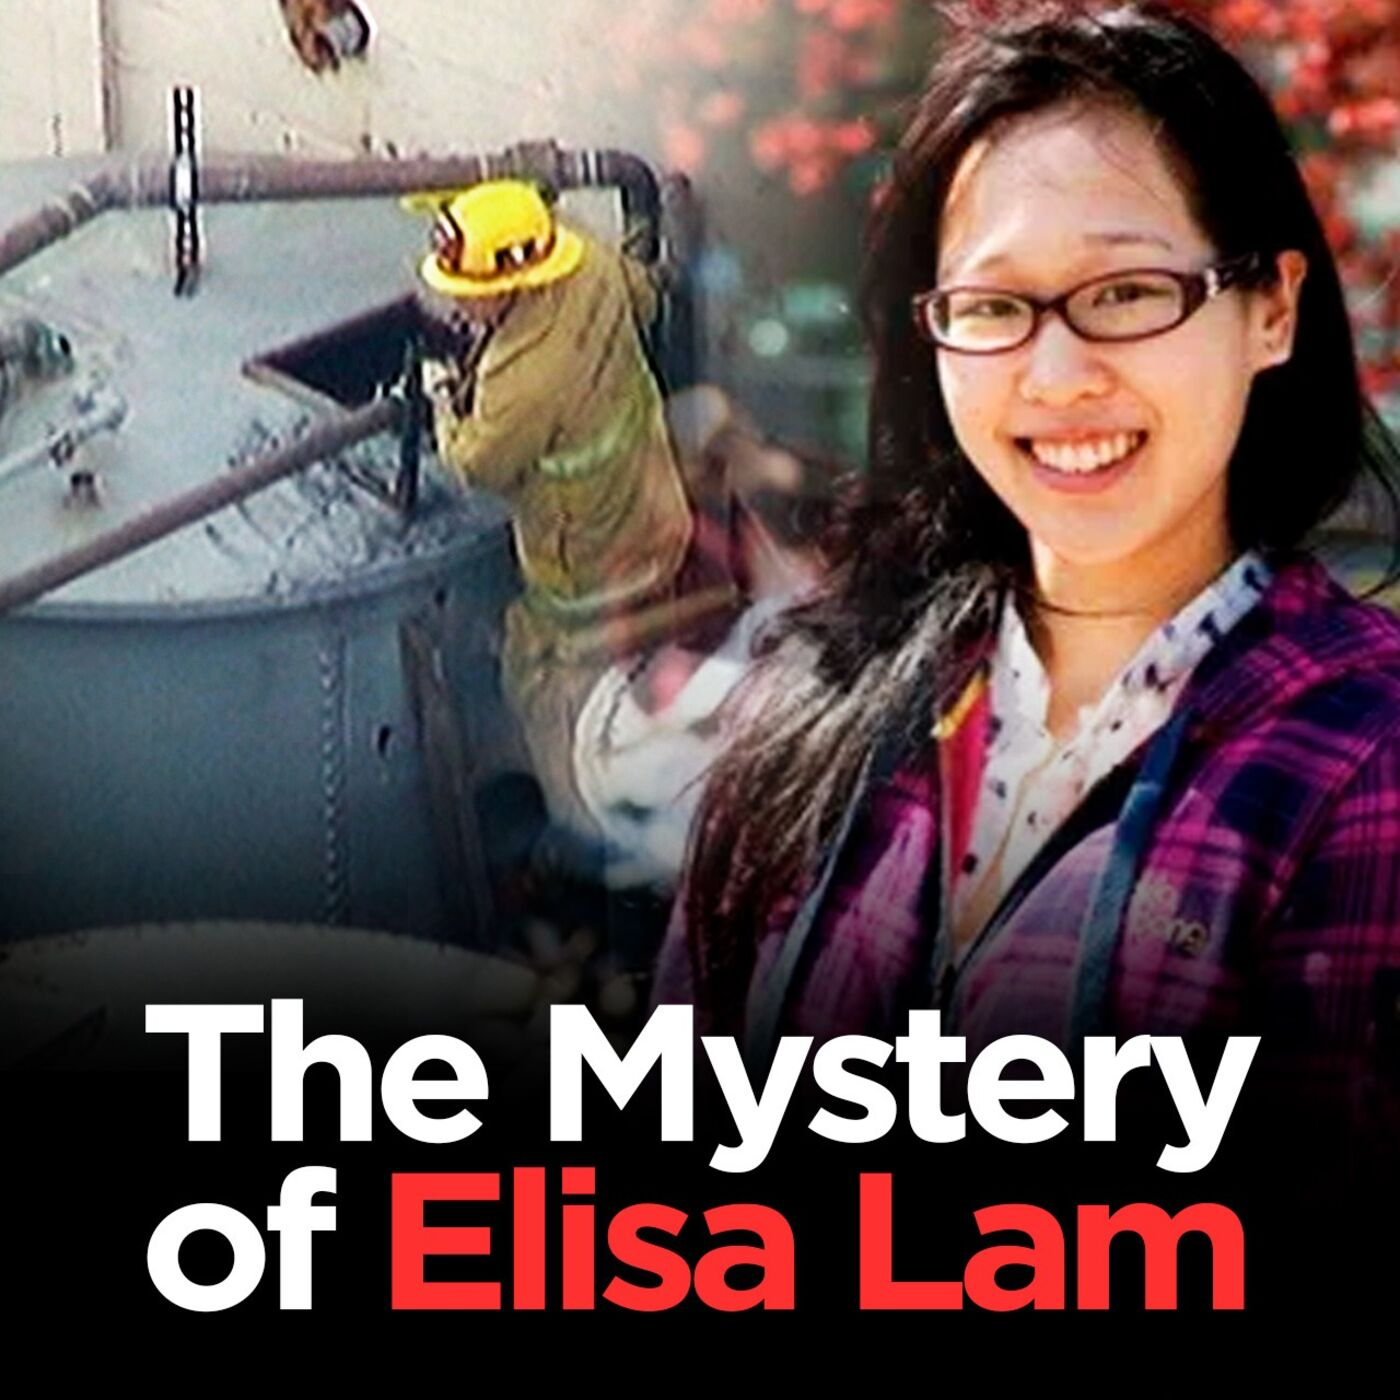 The Mysterious and Disturbing Case of Elisa Lam